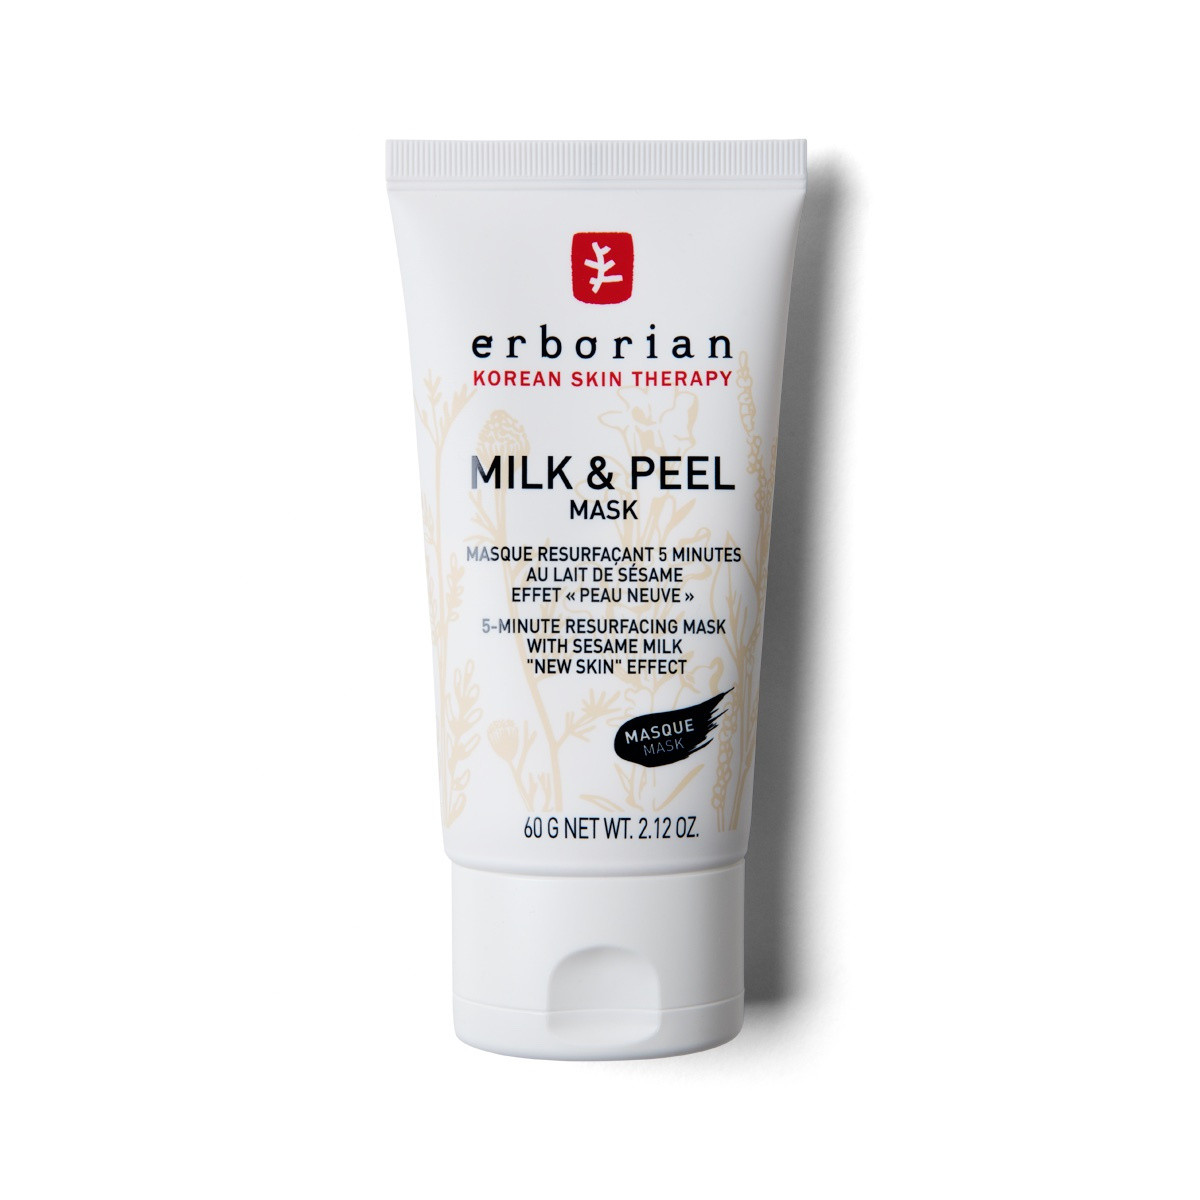 Milk and peel mask - Face Mask, Cream, large image number 0